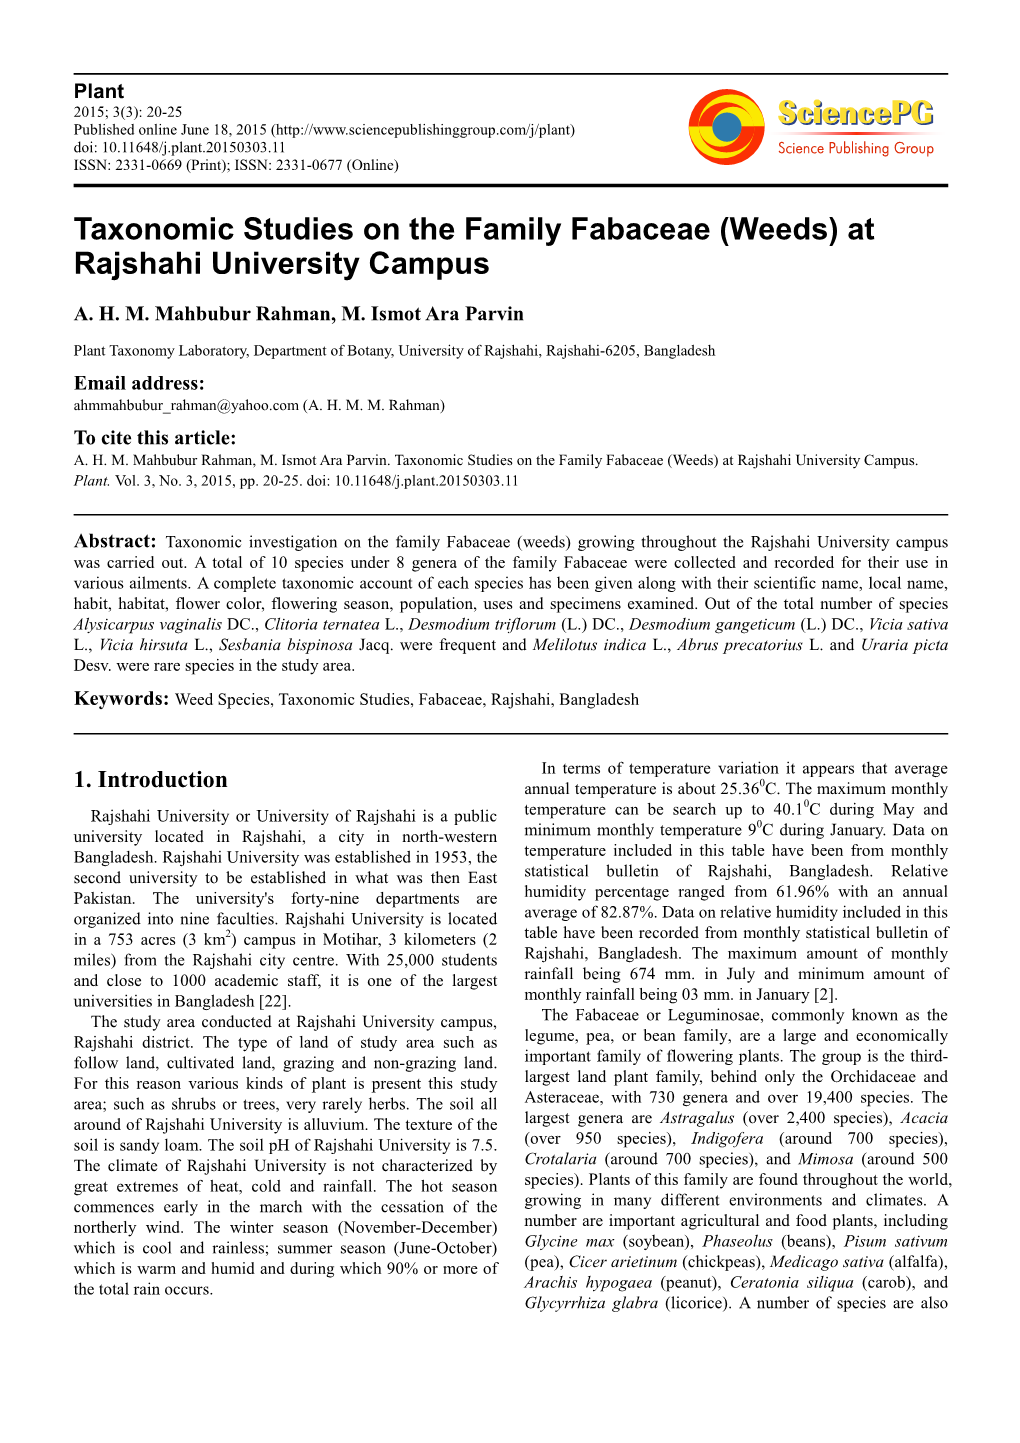 Taxonomic Studies on the Family Fabaceae (Weeds) at Rajshahi University Campus